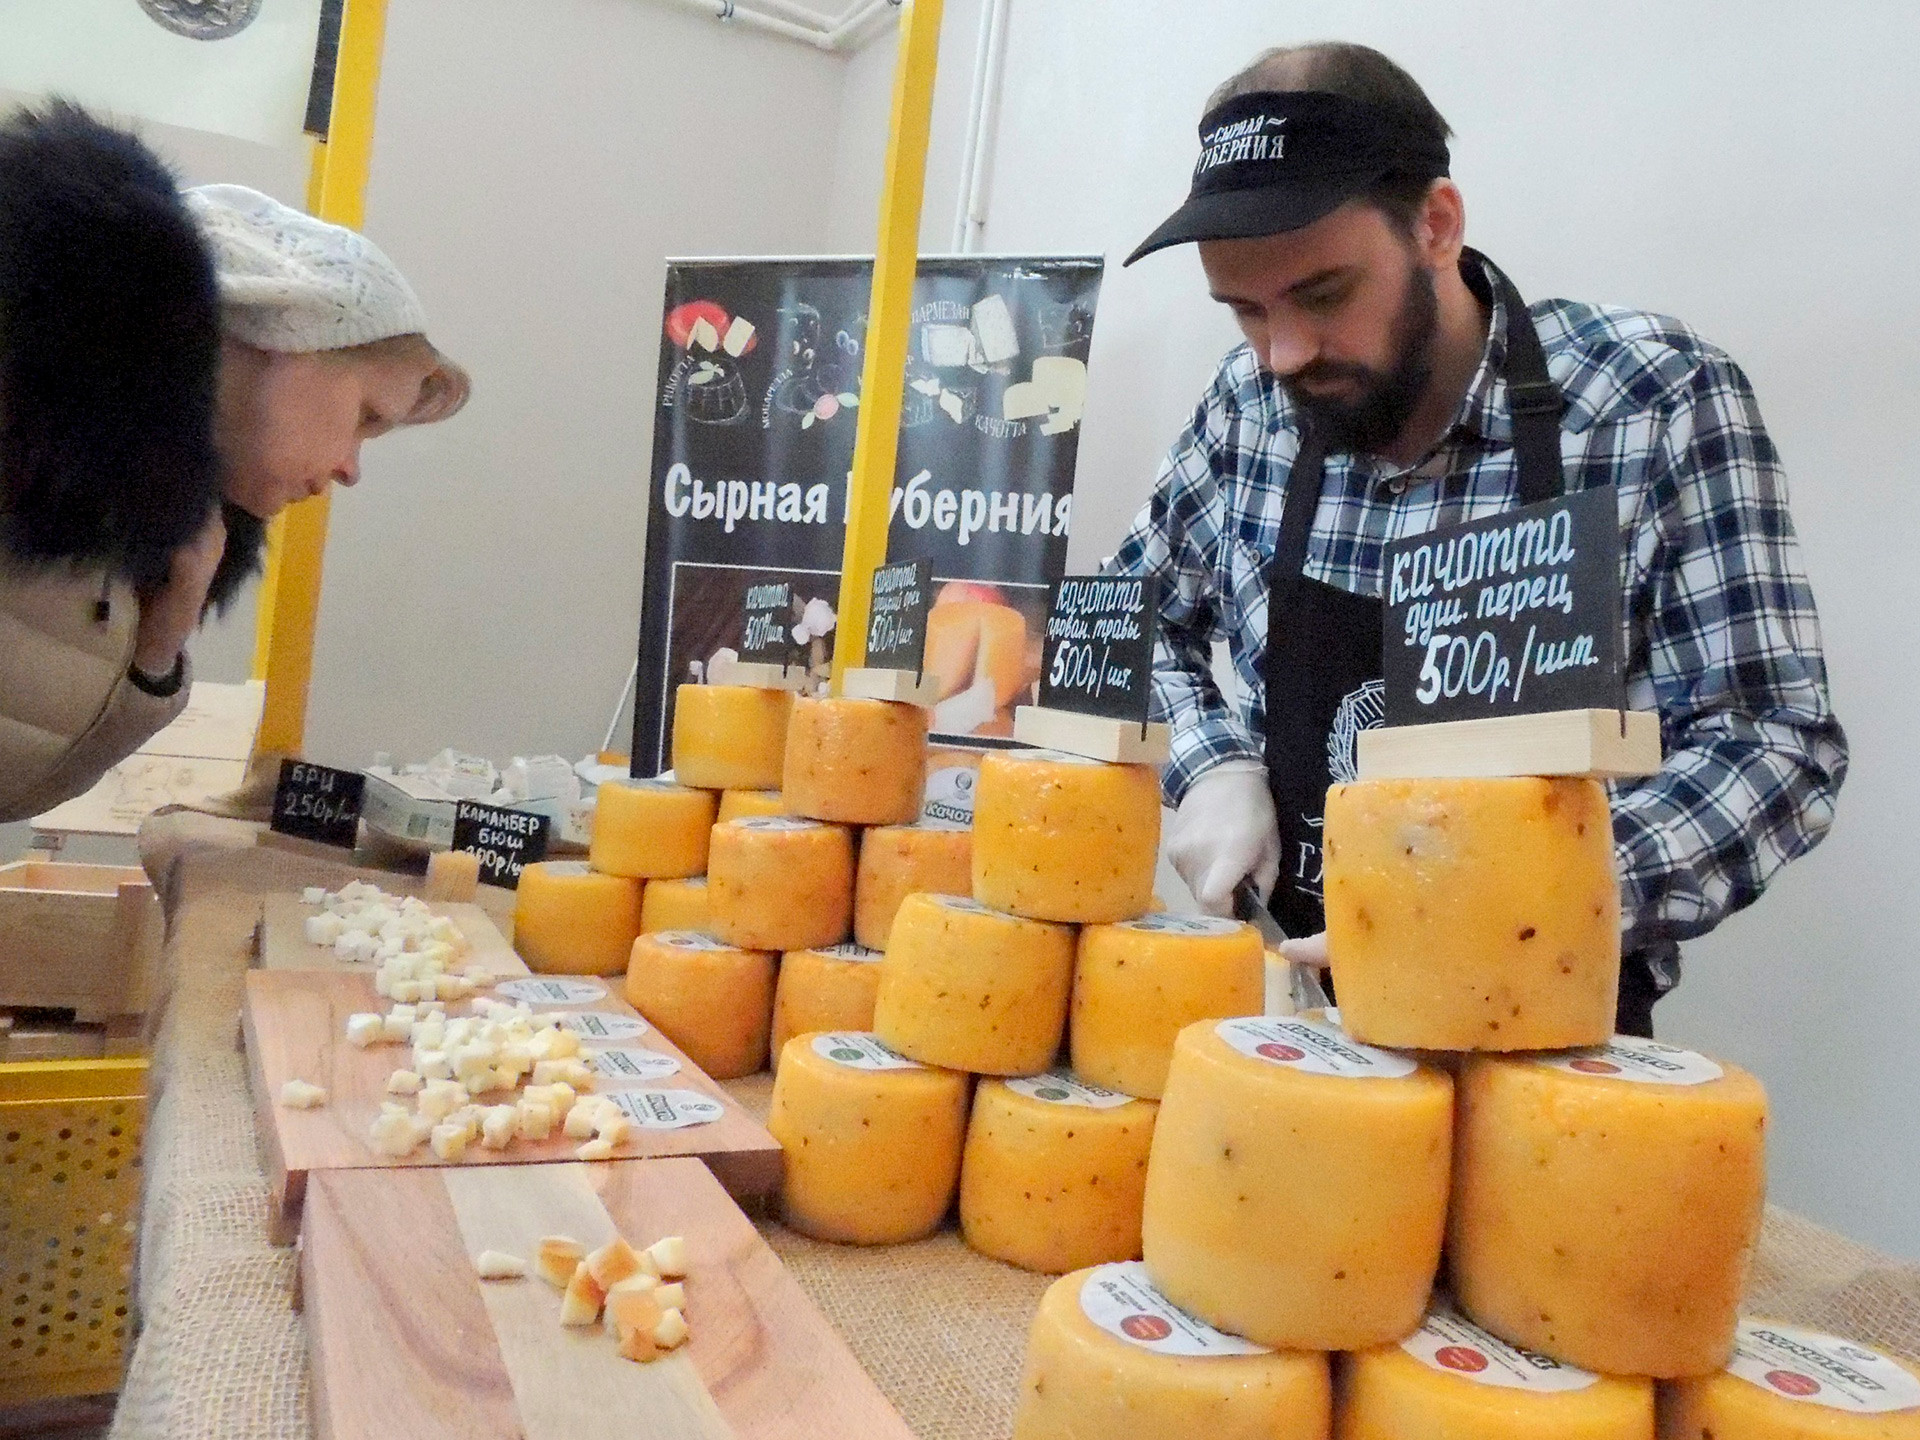 The festival of cheese in Moscow